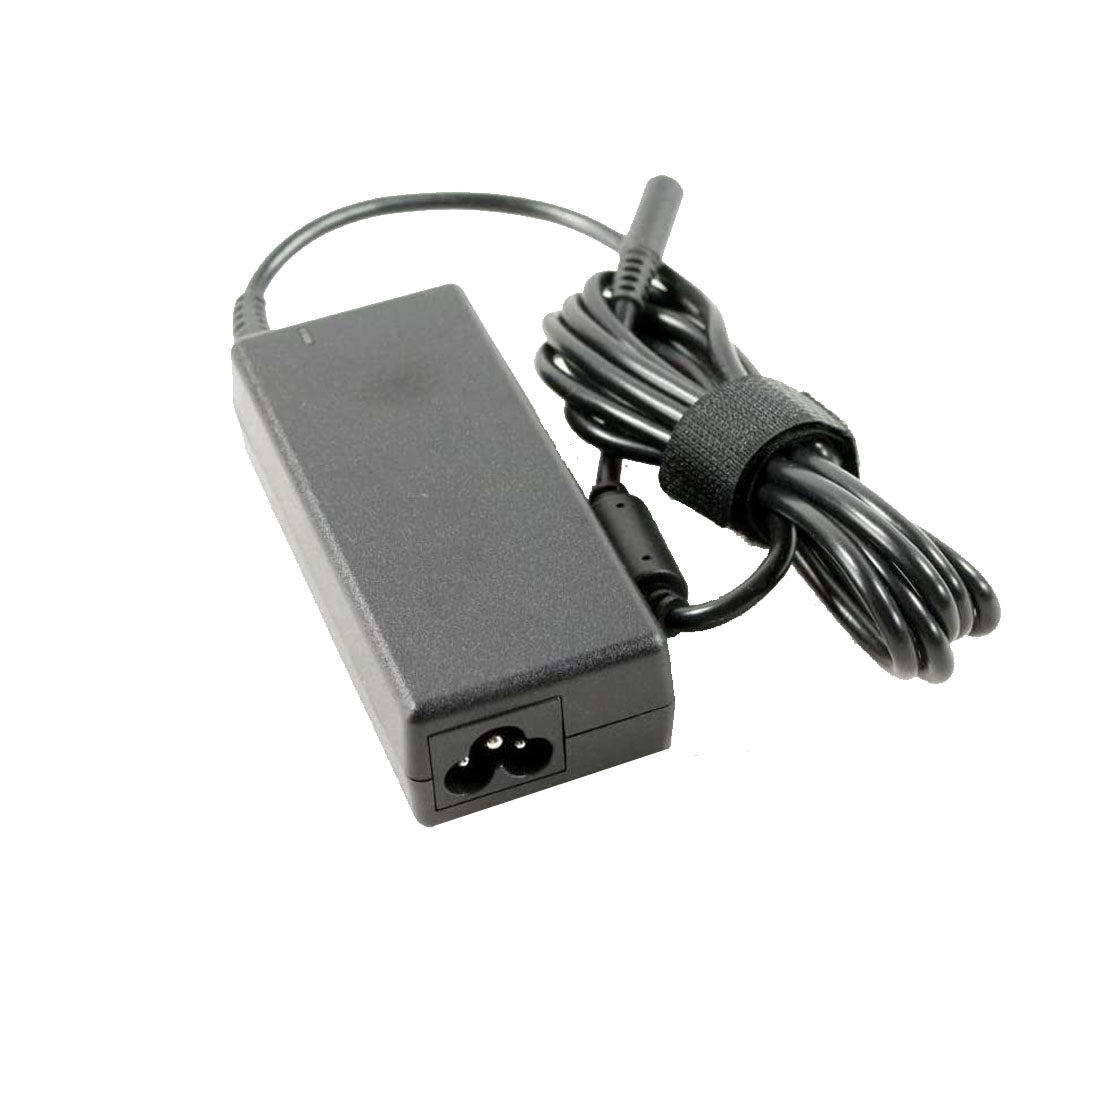 Dell Original 65W 19.5V 4.5mm Pin Laptop Charger Adapter for Inspiron 15 5567 With Power Cord